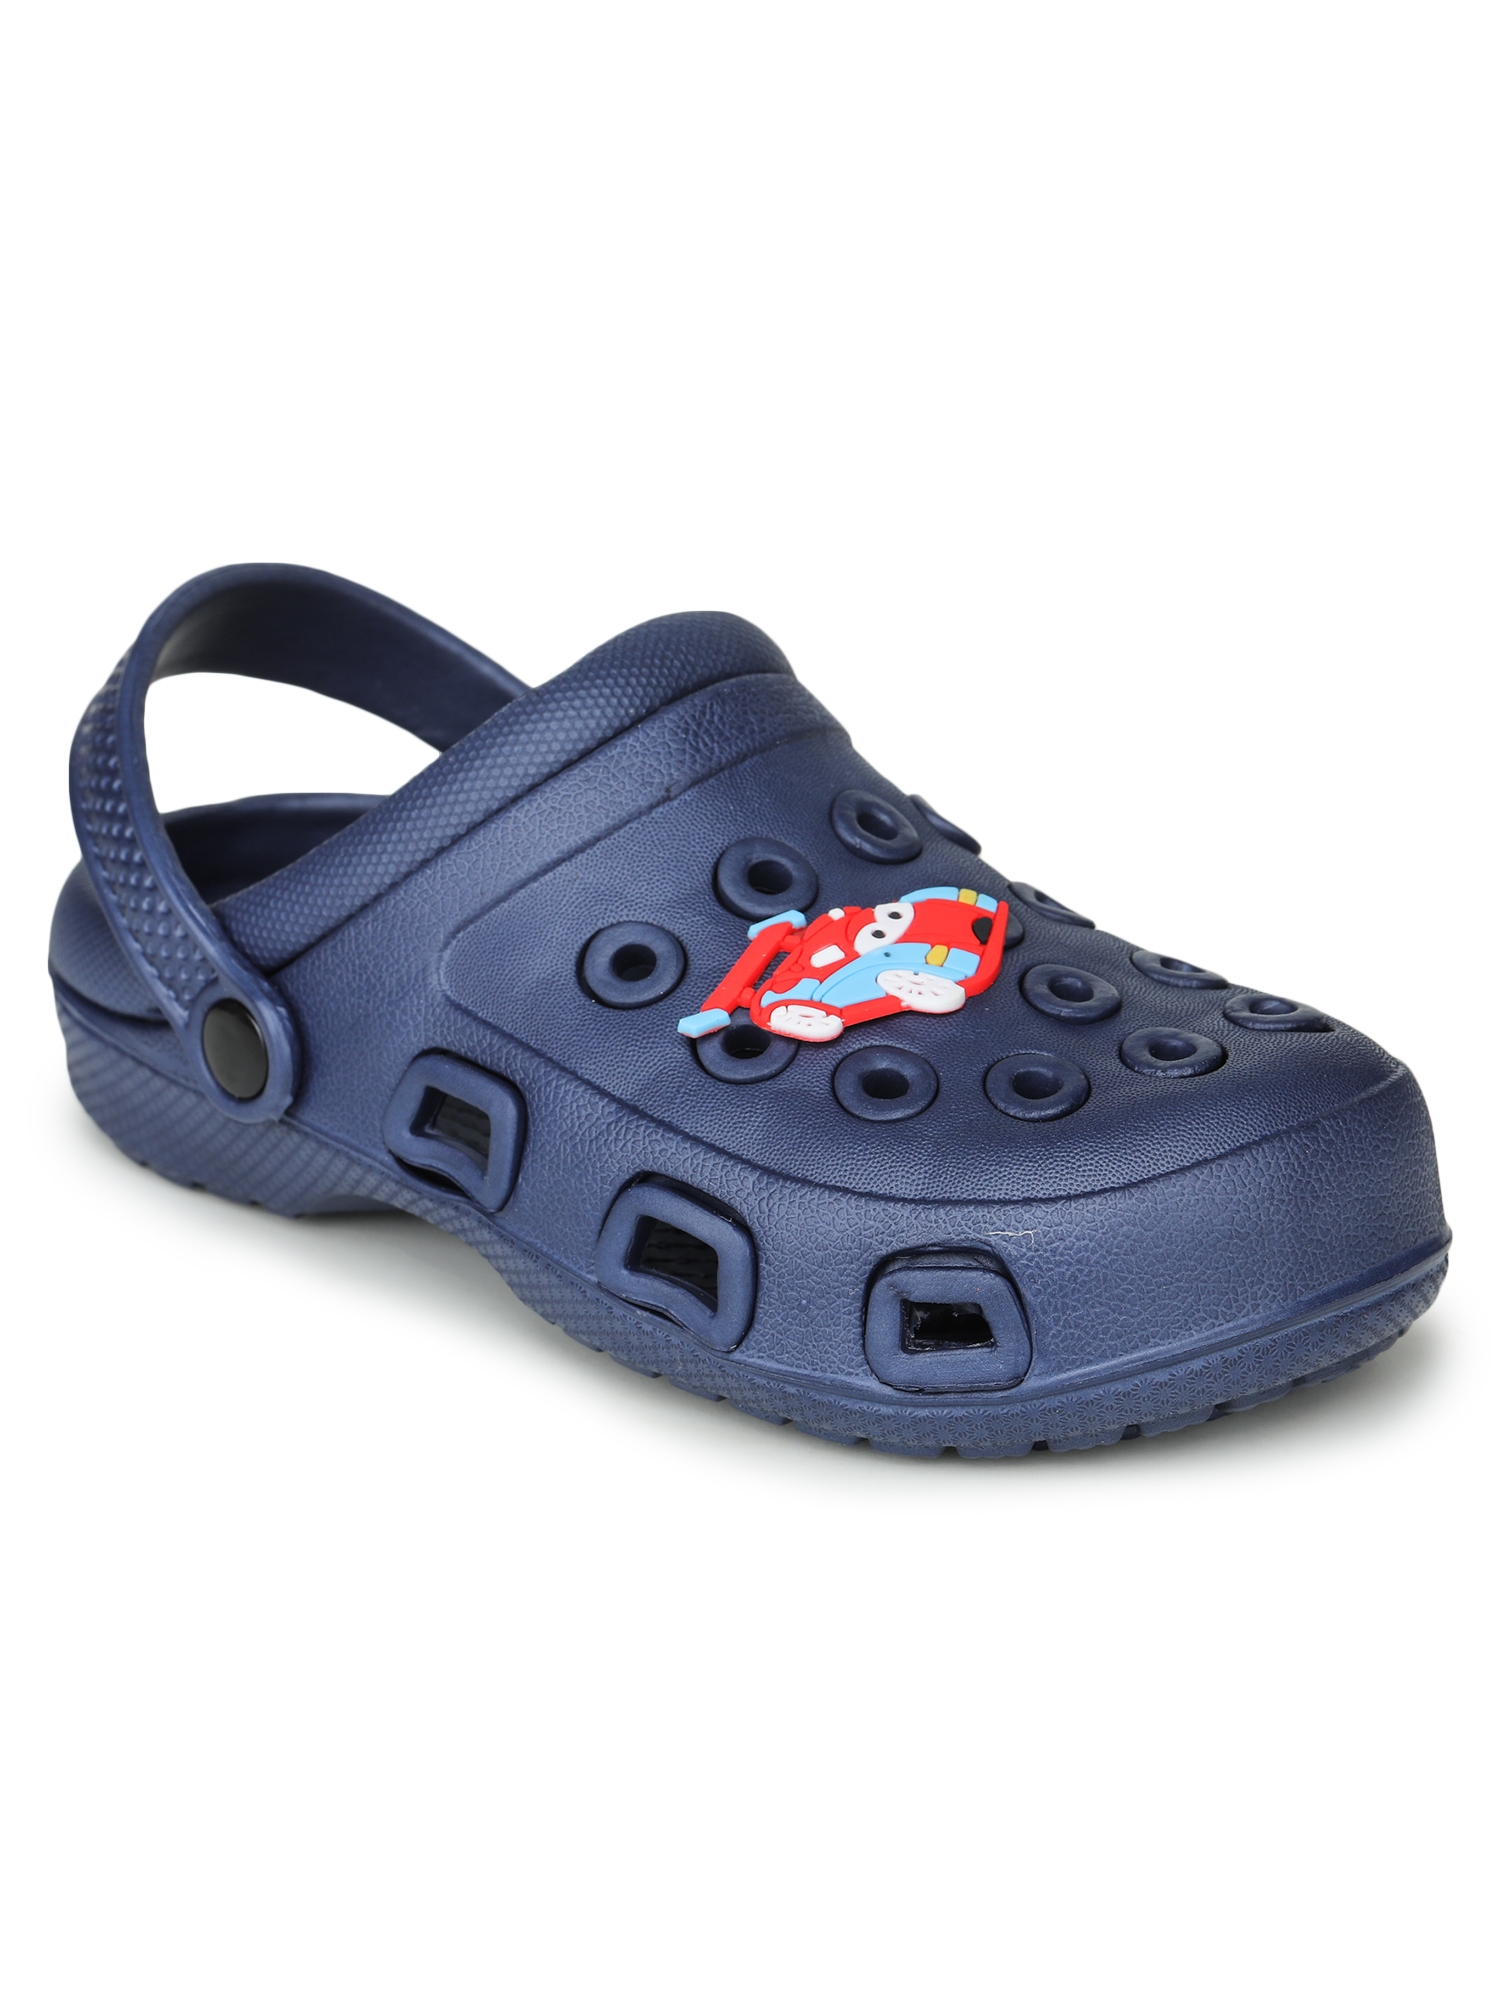 EASY TO GO LIGHT WEIGHT BLUE CLOGS FOR BOYS & GIRLS 